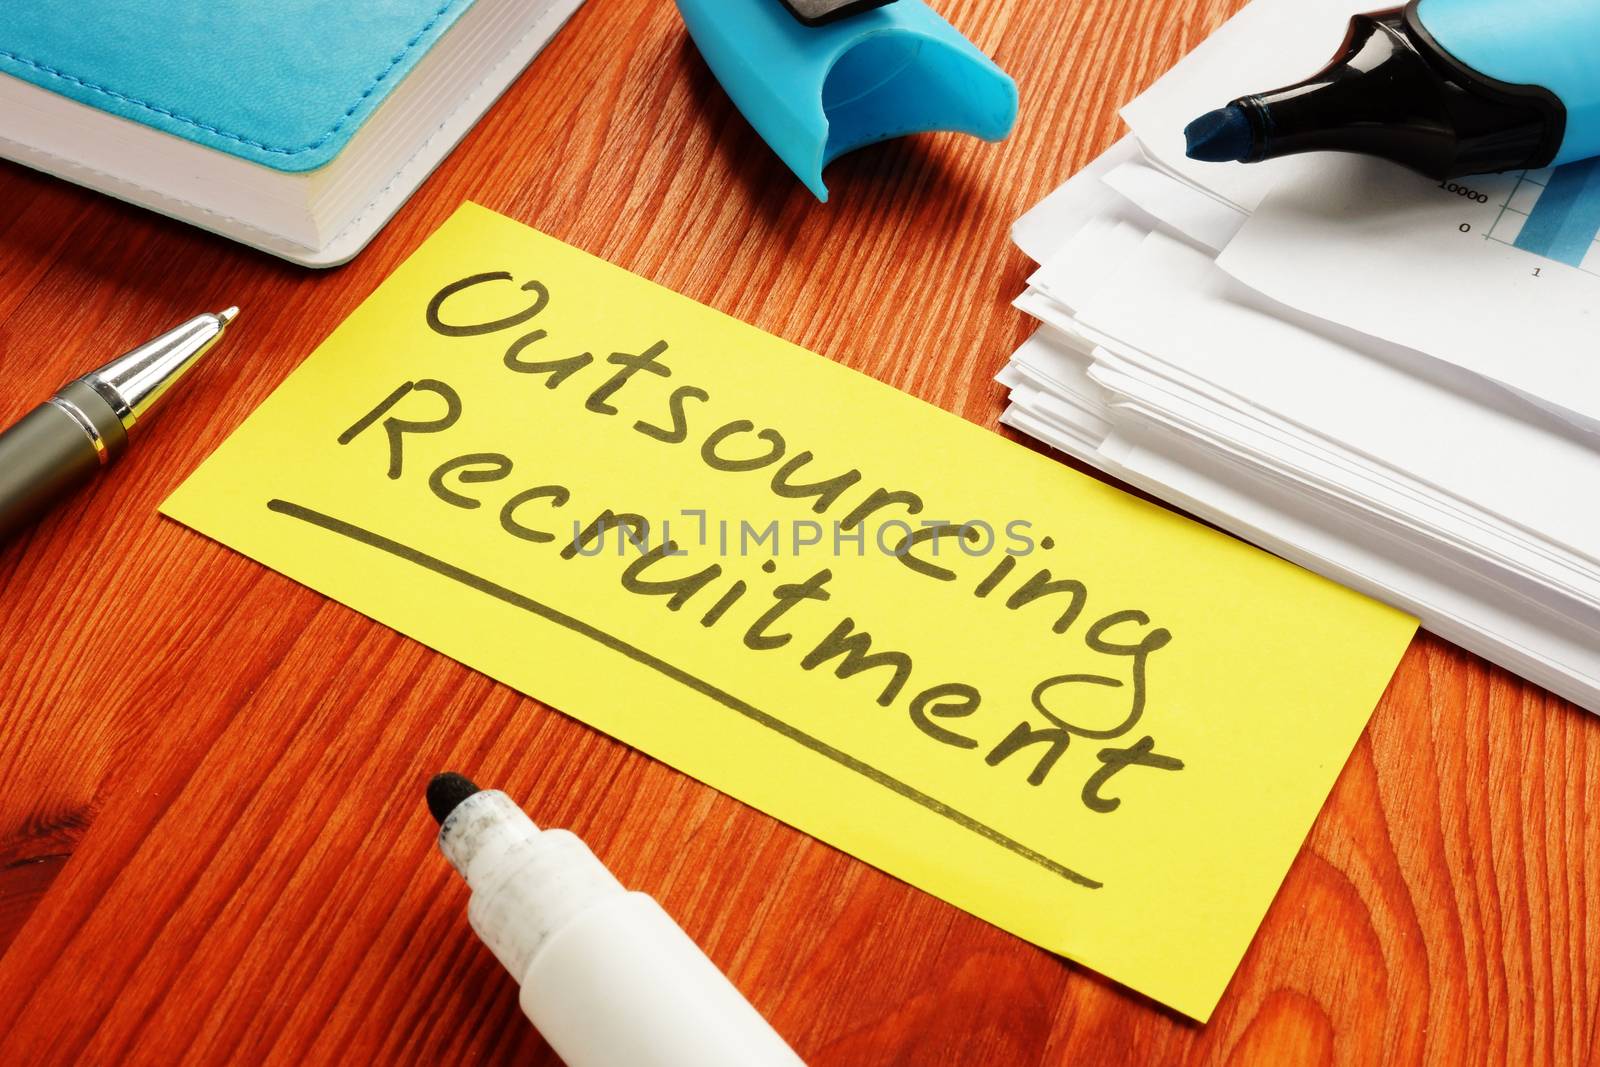 Outsourcing recruitment memo sign about HR process of delegation.